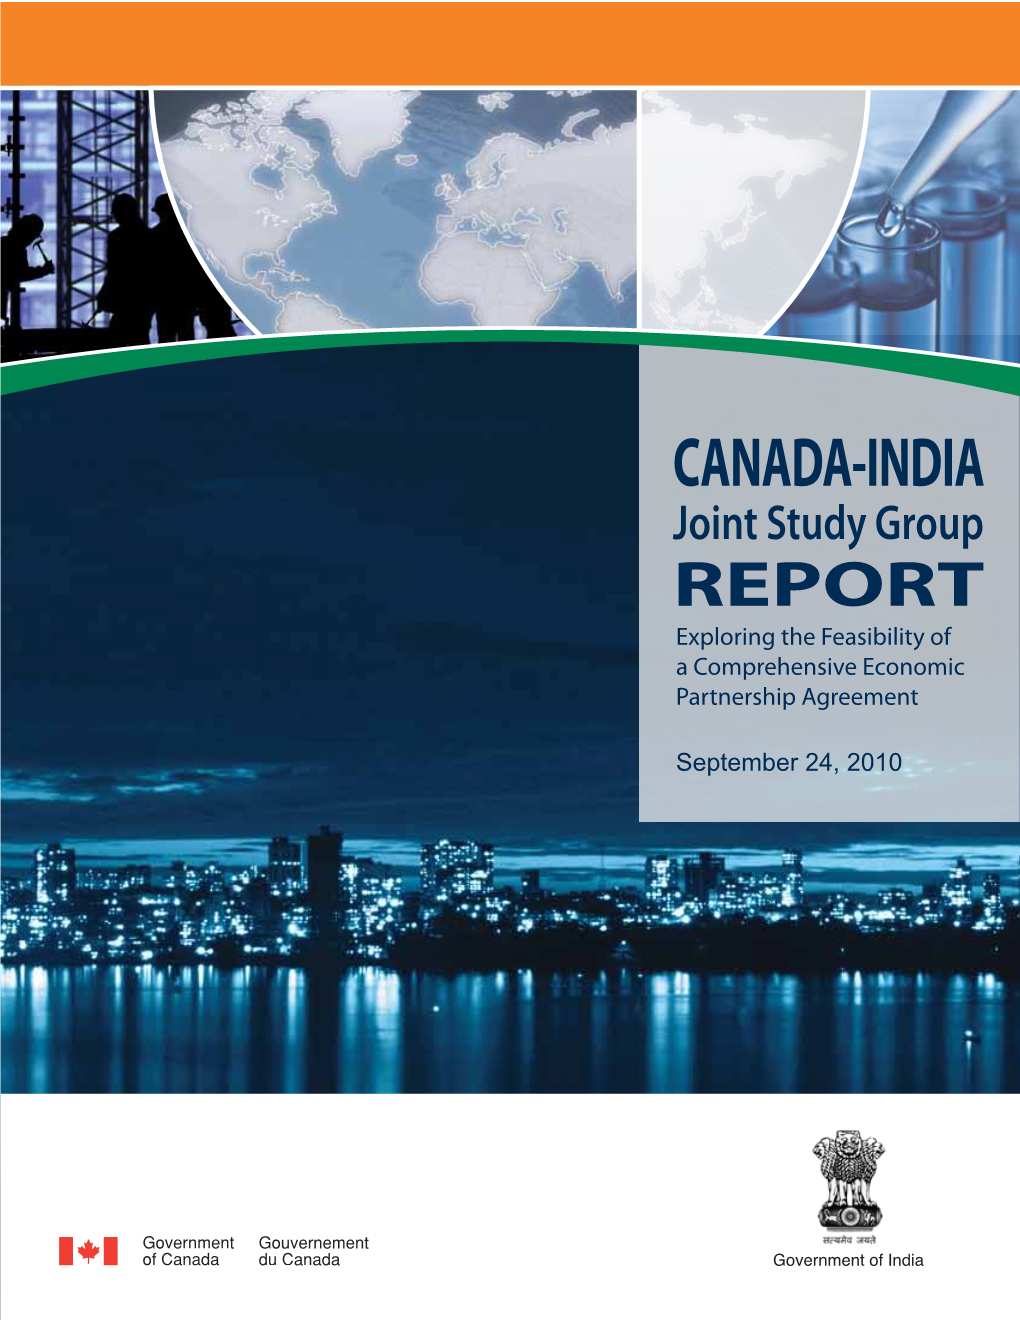 CANADA-INDIA Joint Study Group REPORT Exploring the Feasibility of a Comprehensive Economic Partnership Agreement